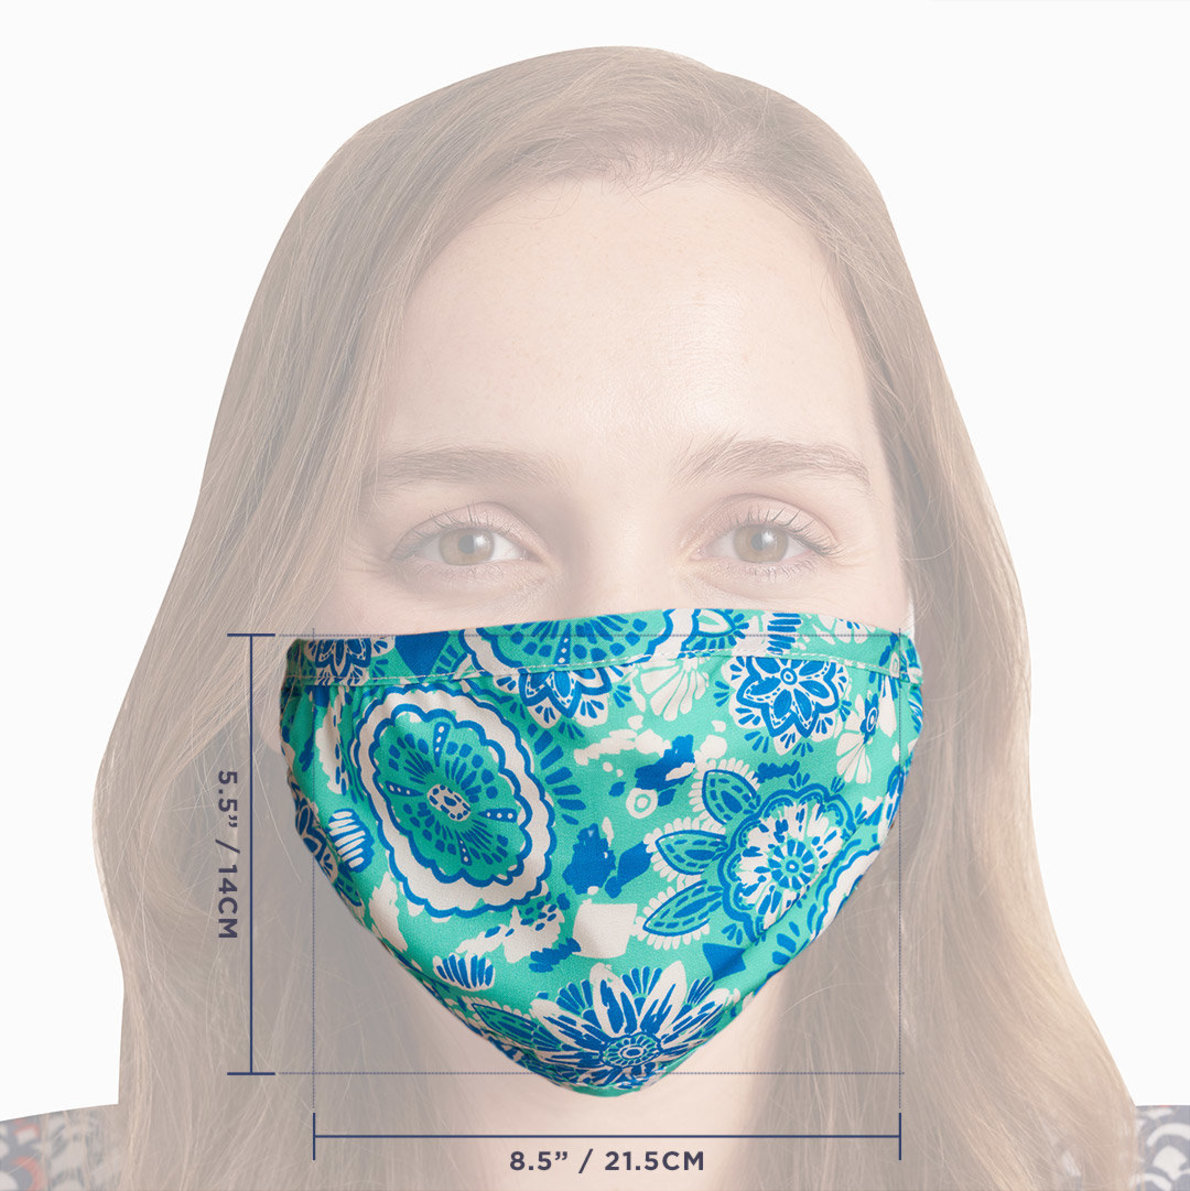 View larger image of Non-Medical Reusable Adult Face Mask - Floral